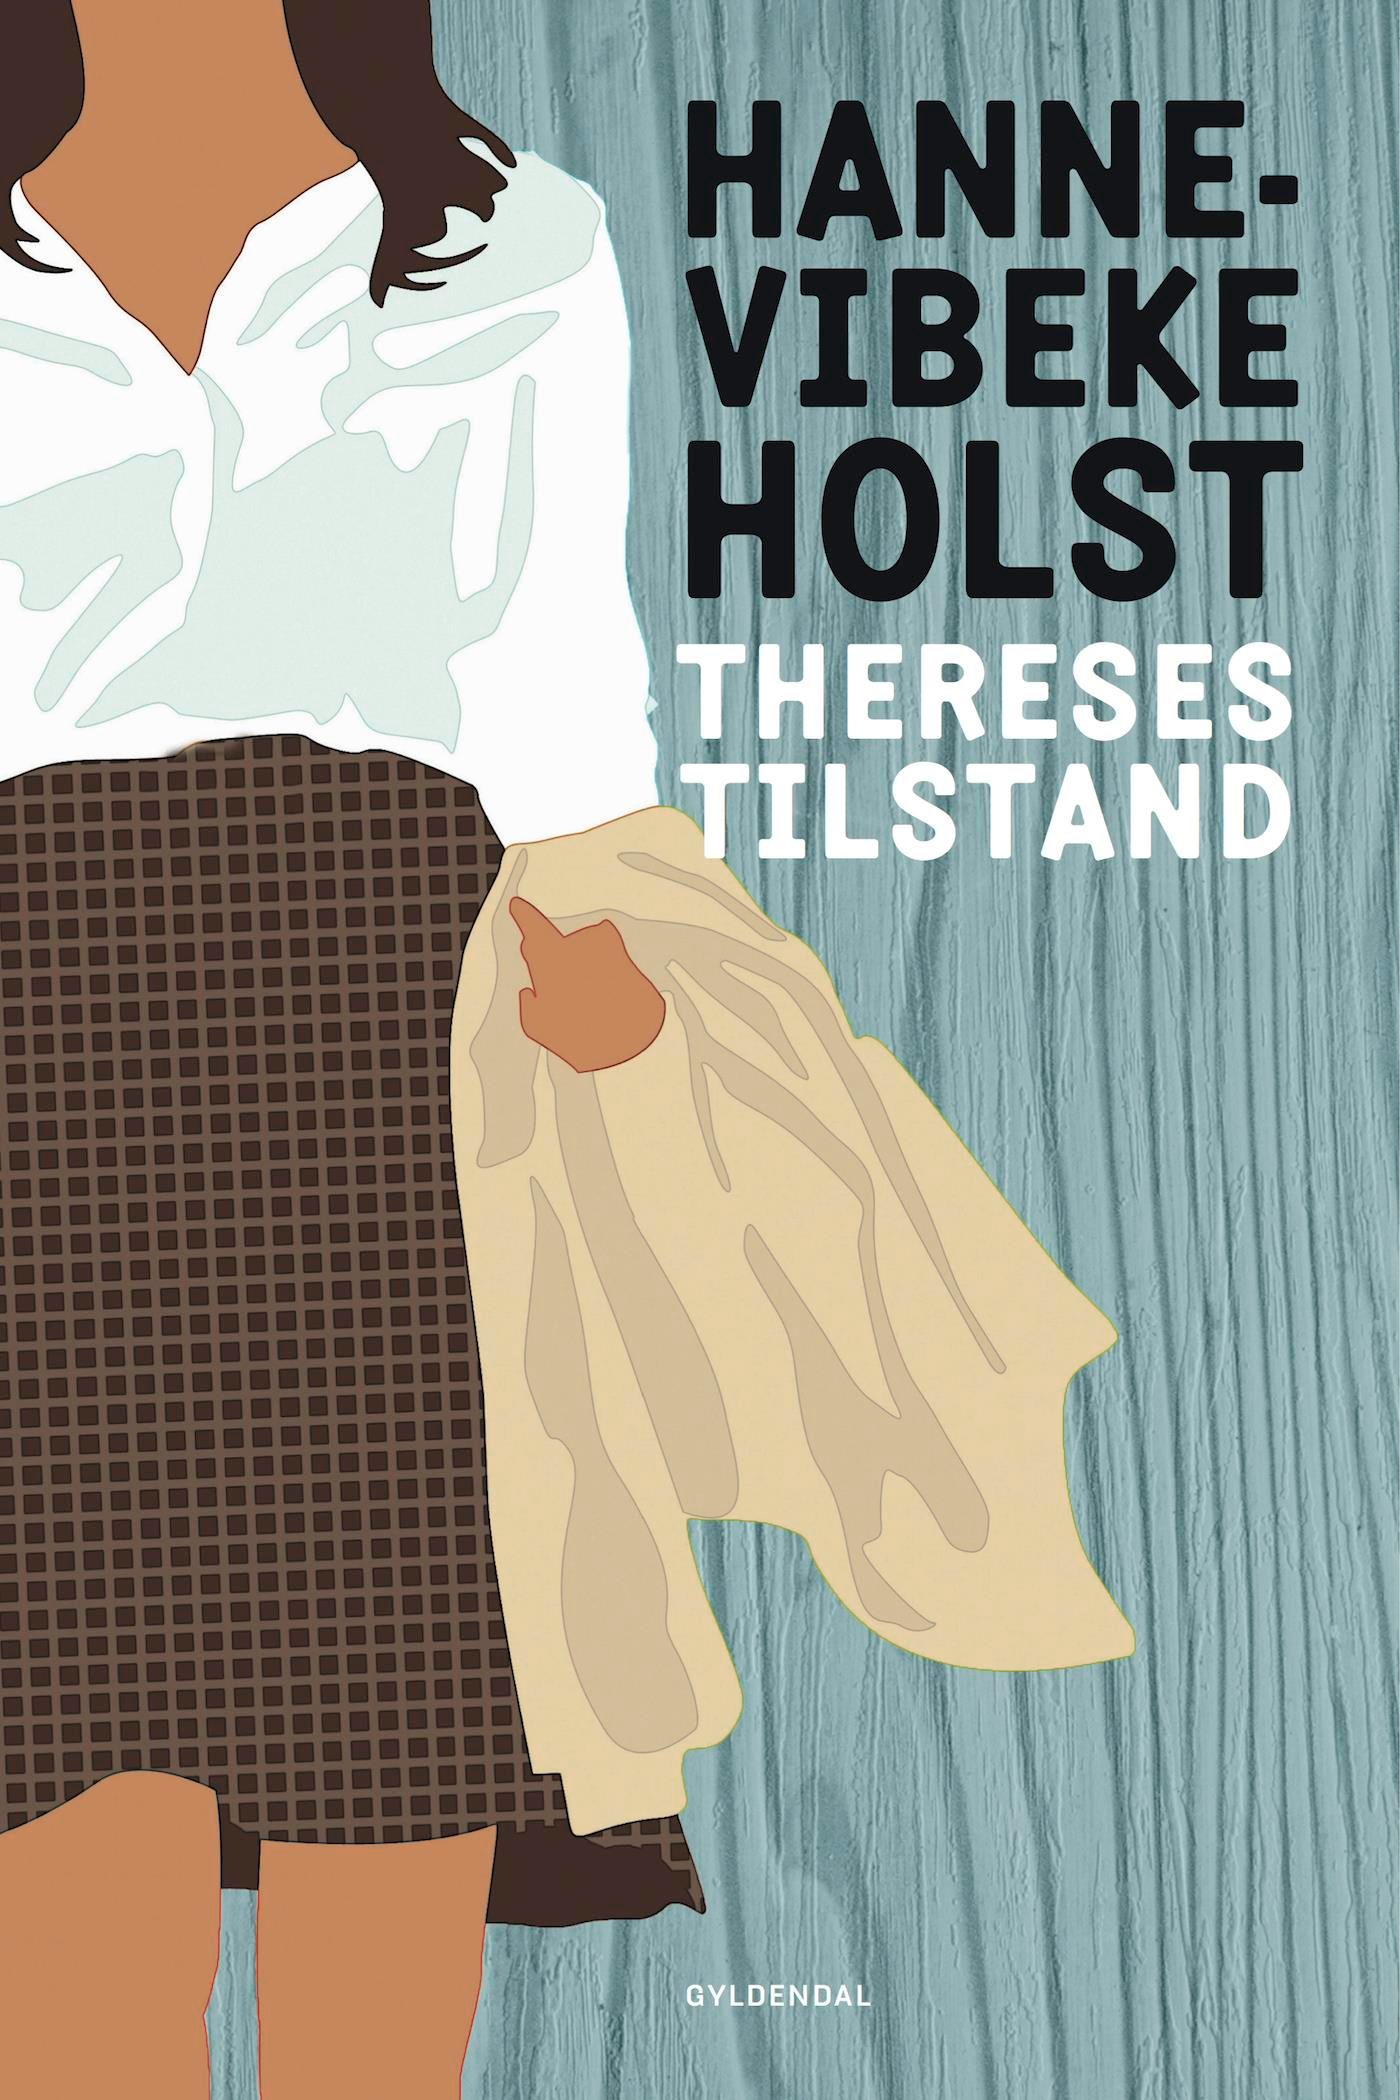 Thereses tilstand, eBook by Hanne-Vibeke Holst